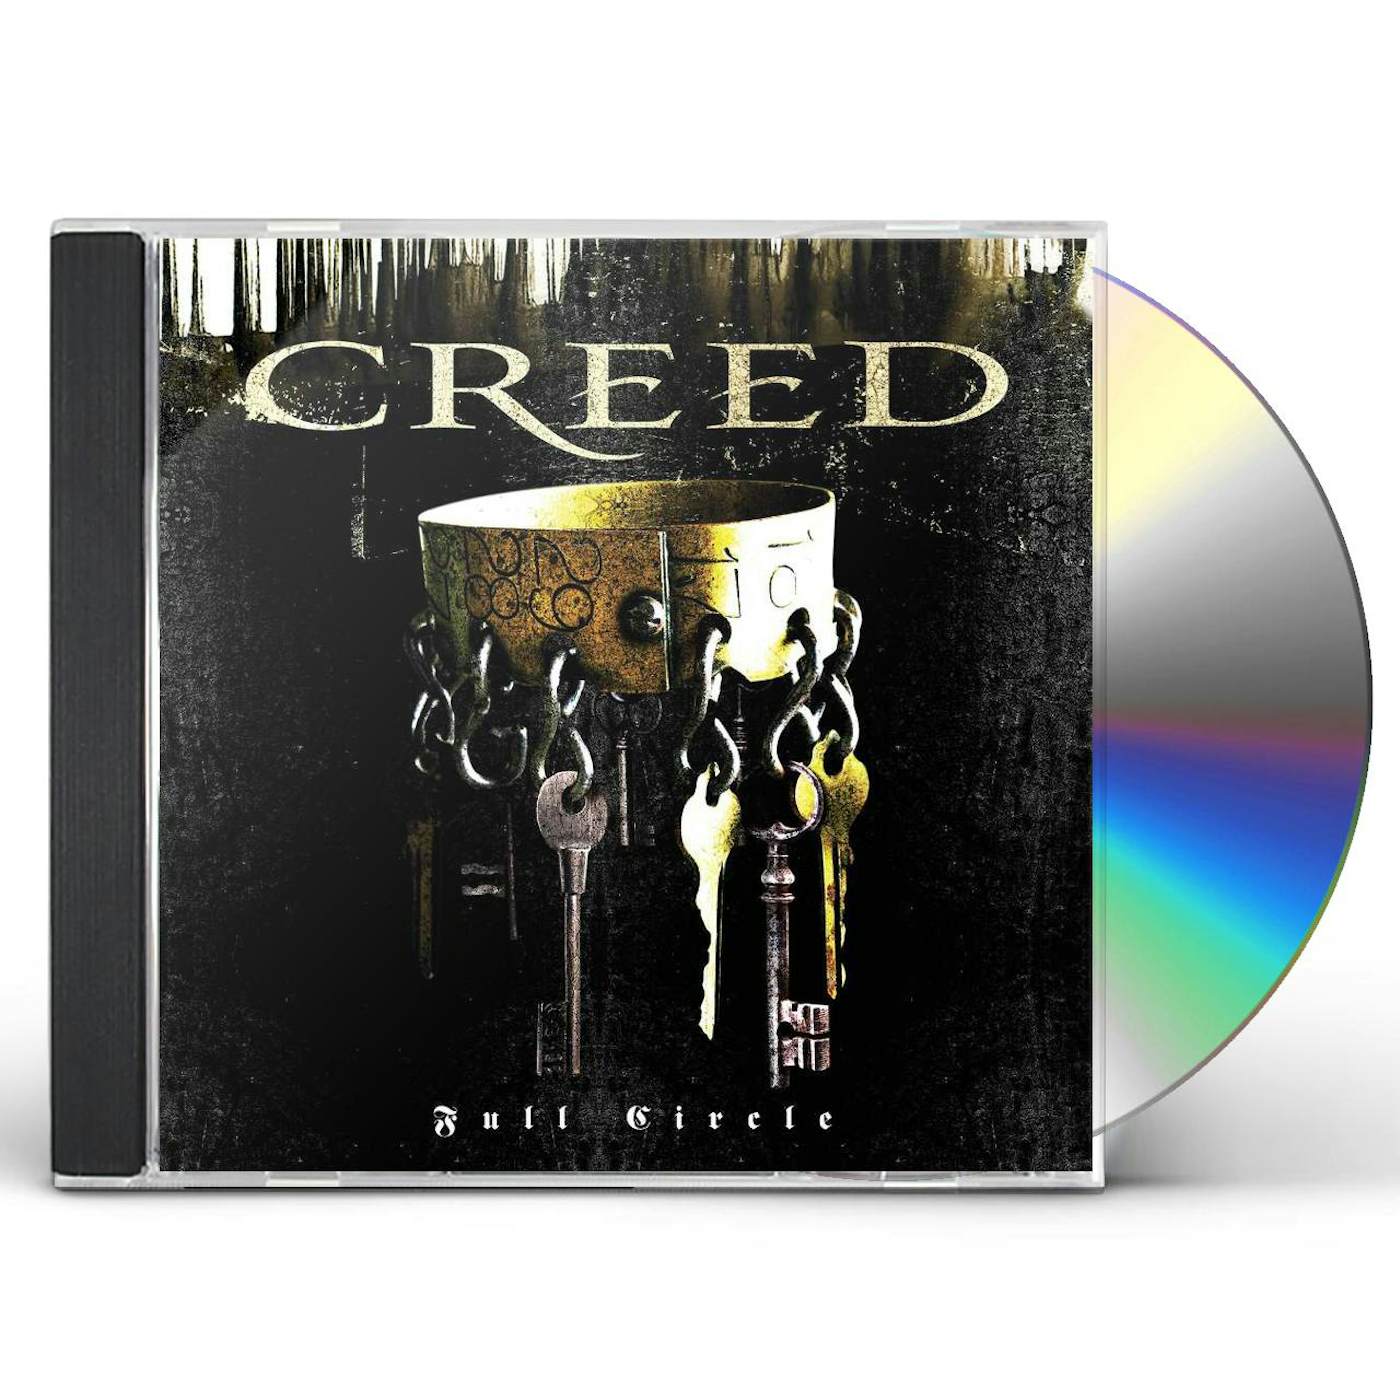 CREED GREATEST HITS VINYL NEW! LIMITED BLUE LP! MY SACRIFICE, ONE